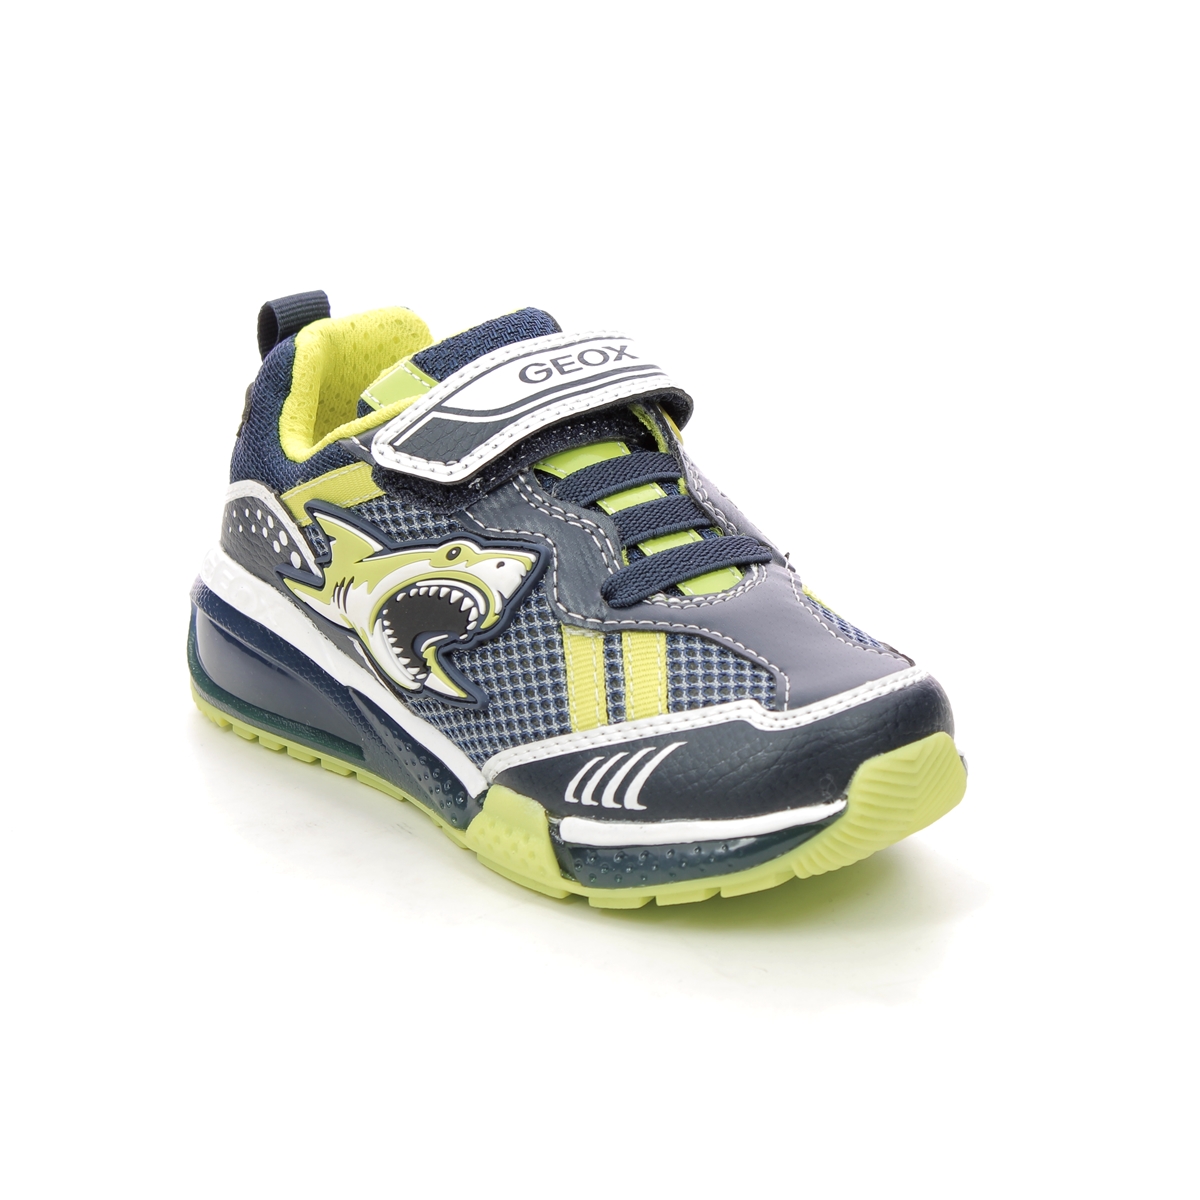 Geox - Bayonyc Shark (Navy Lime) J25Fea-C0749 In Size 33 In Plain Navy Lime For kids